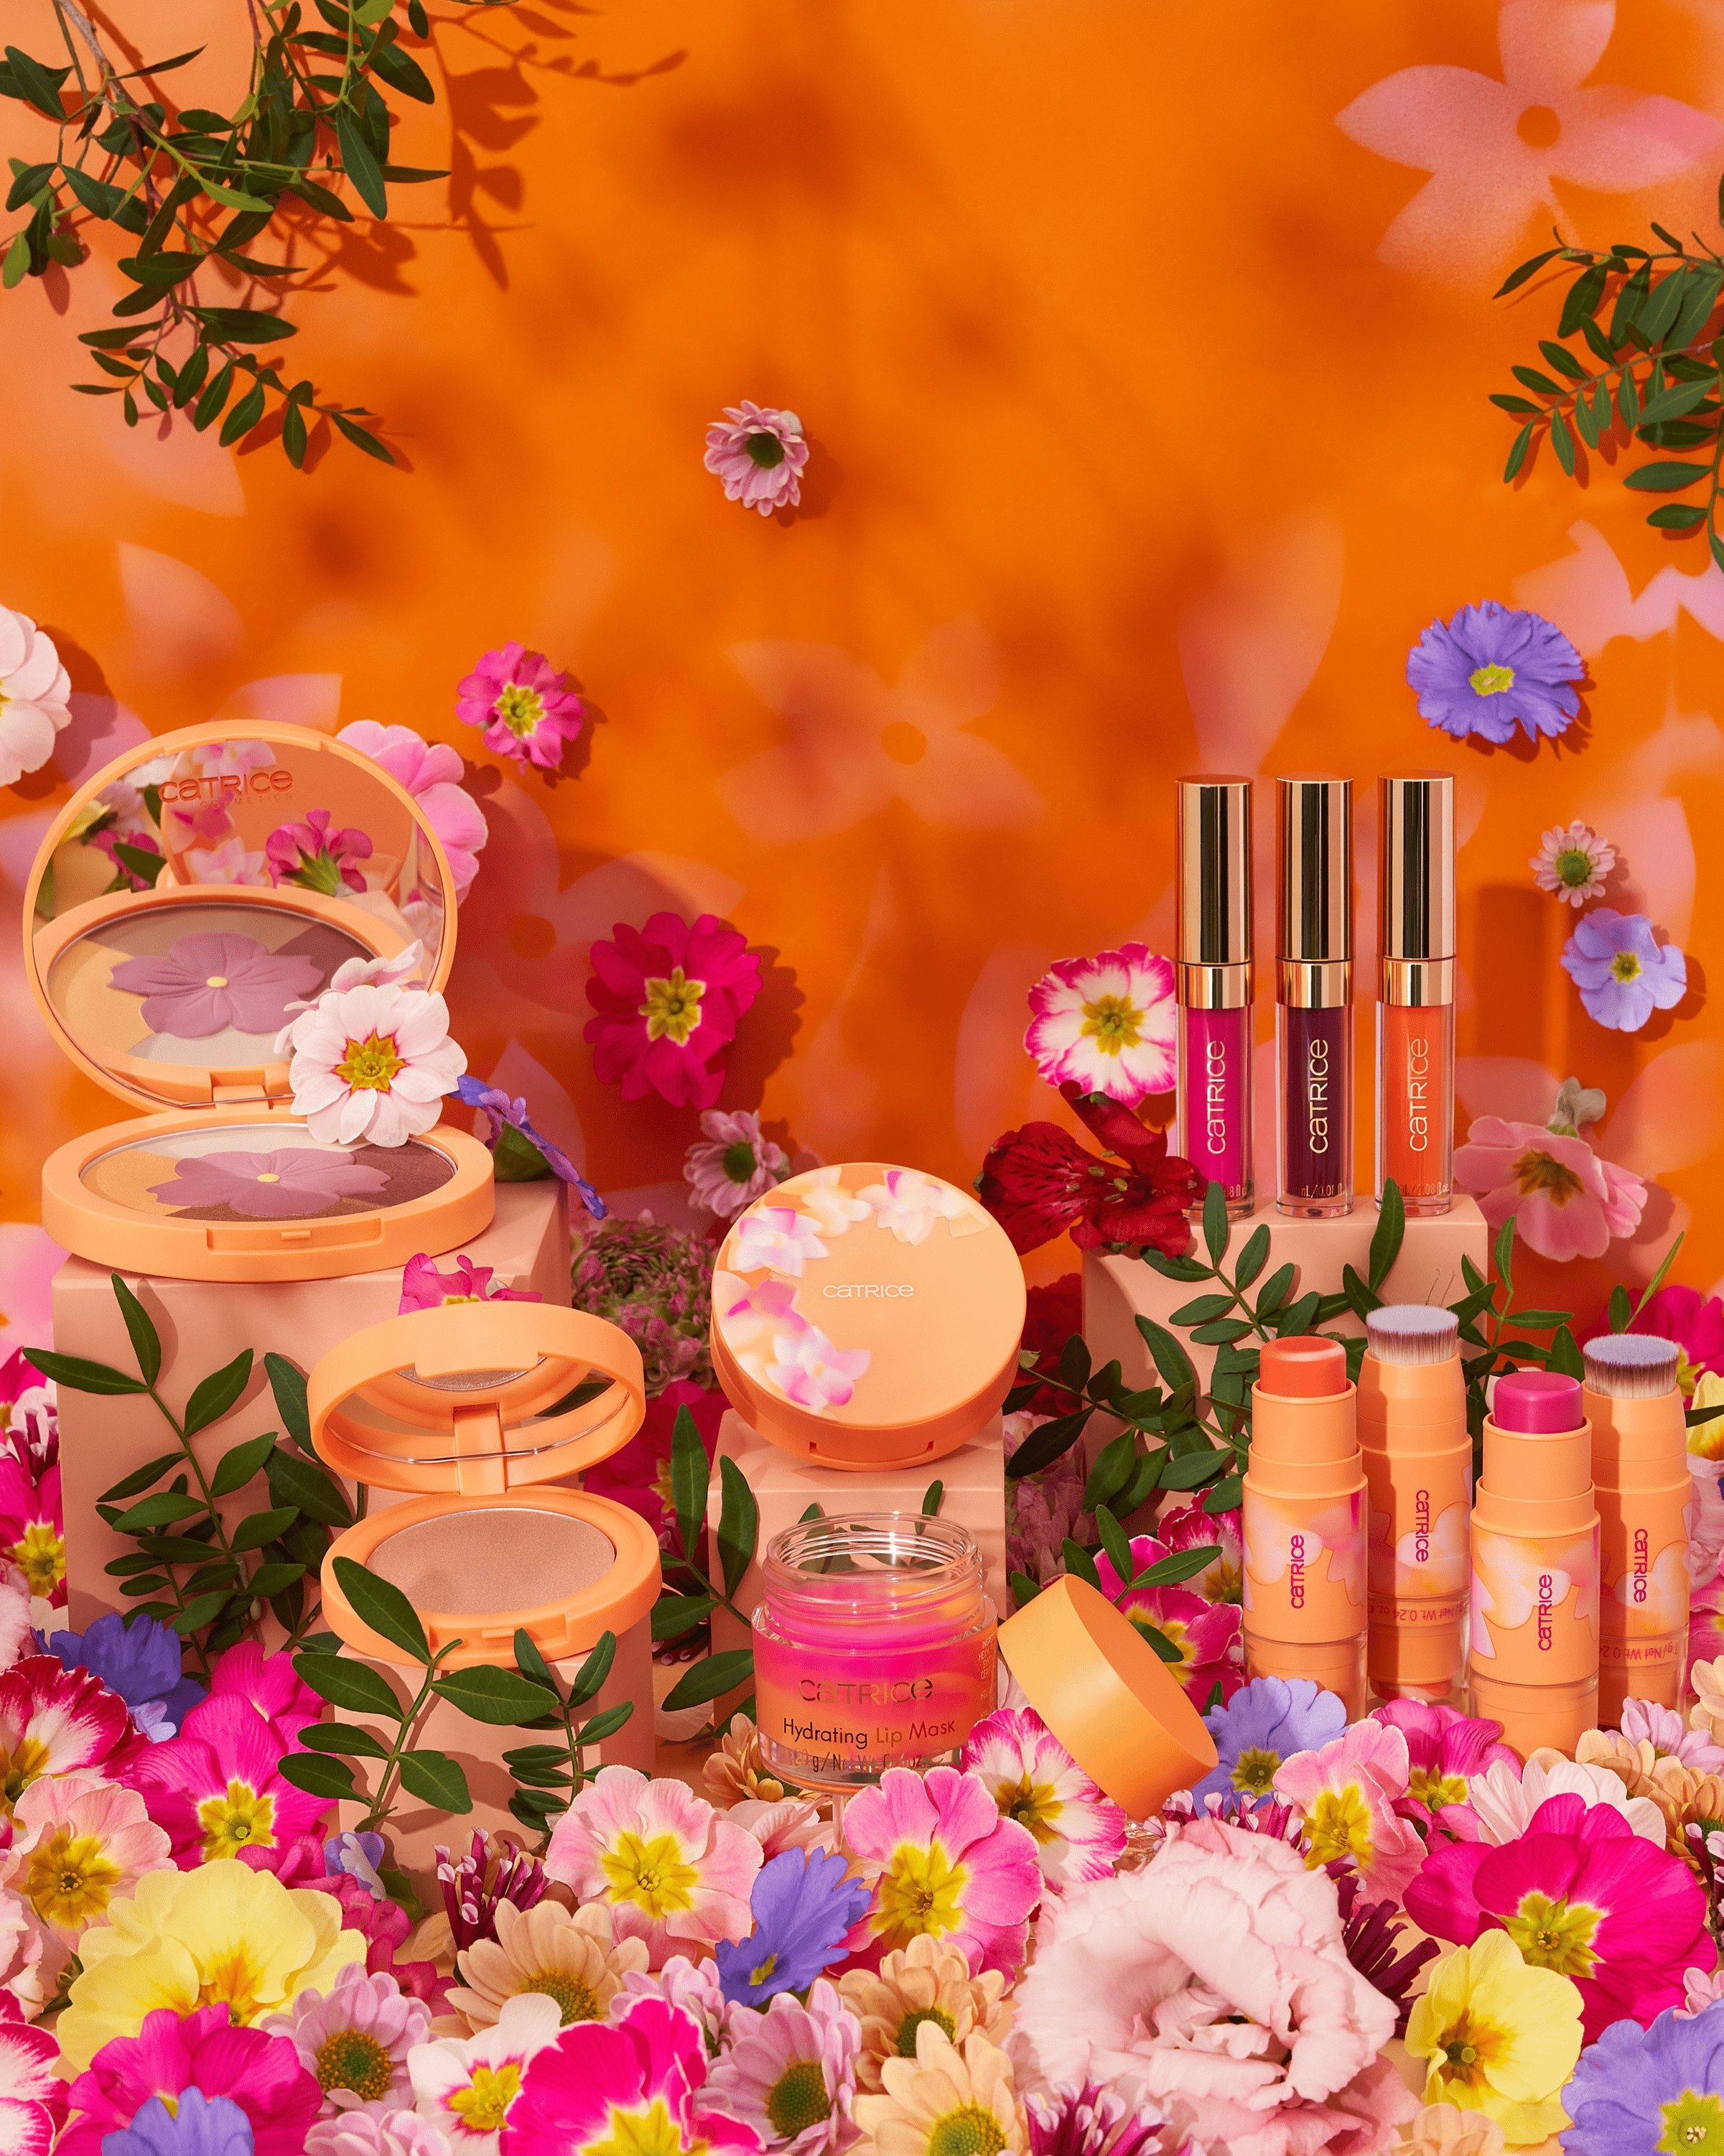 Catrice Seeking Flowers Limited Edition productmix